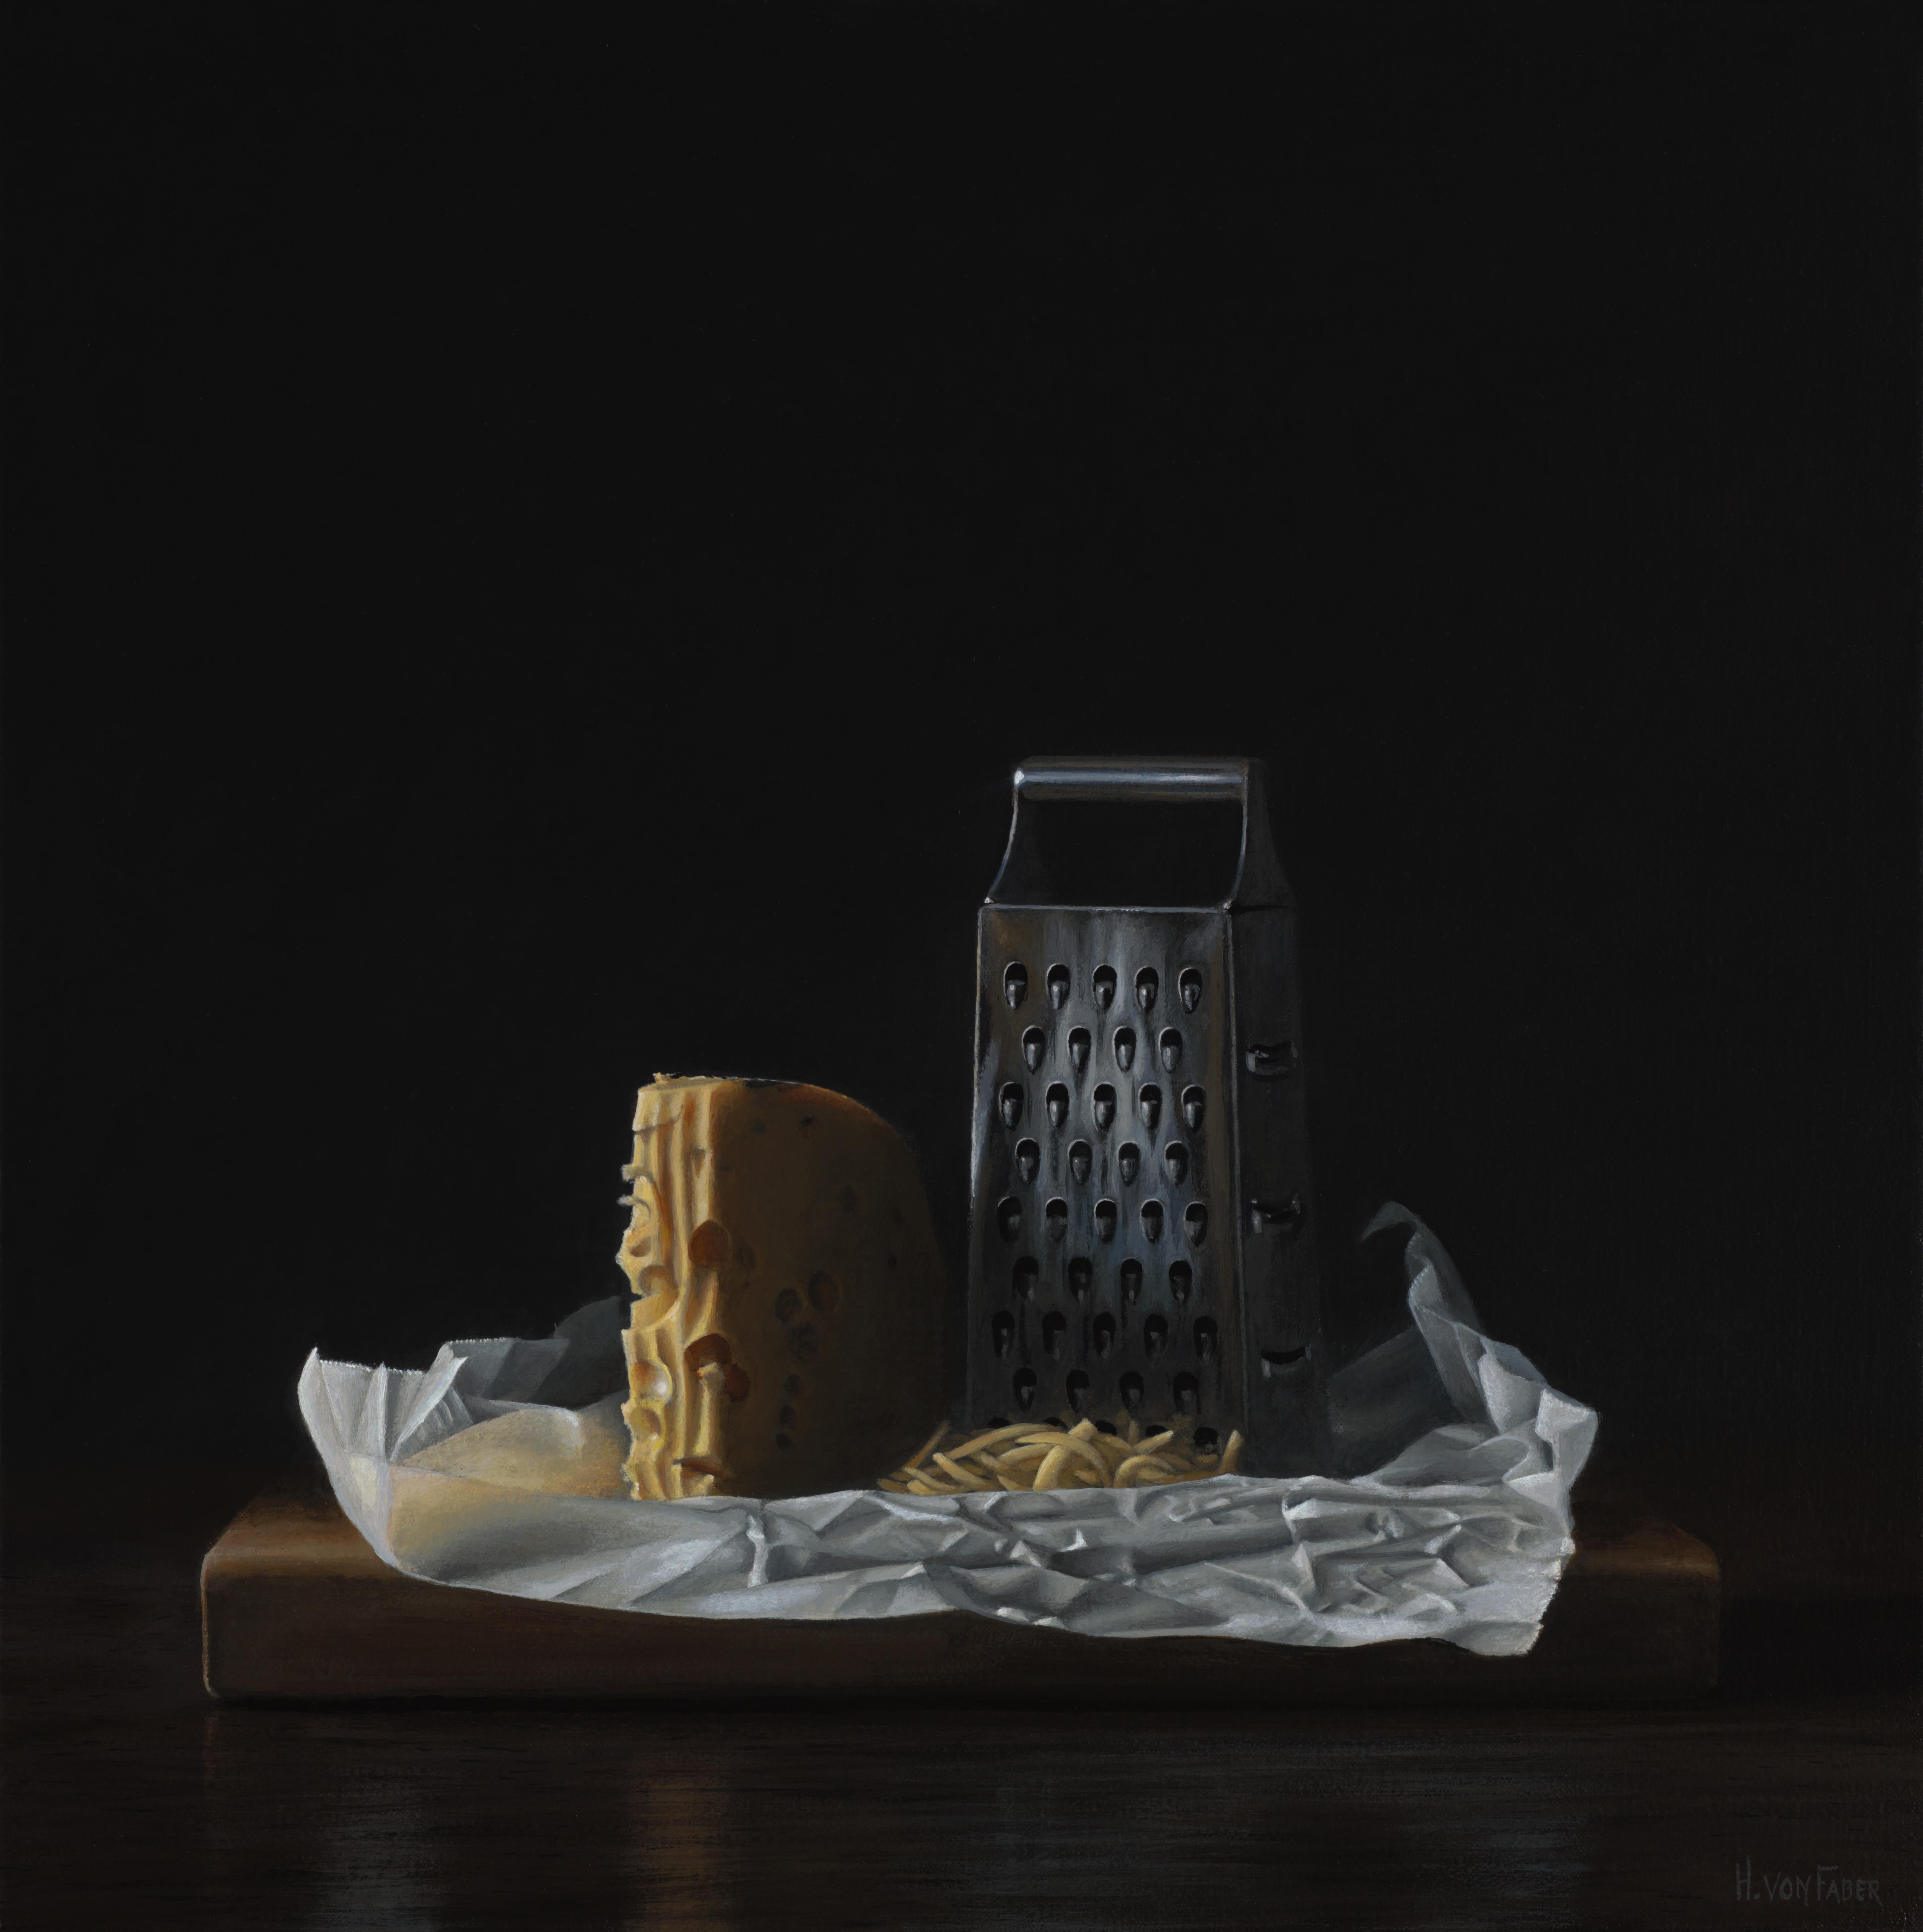 The Hague artist Heidi Von Faber makes still lifes according to tradition of the old masters. Her often dark still lifes show extremely realistic contemporary contemporary atmospheric subjects. Everyday, but also special items such as cups for the